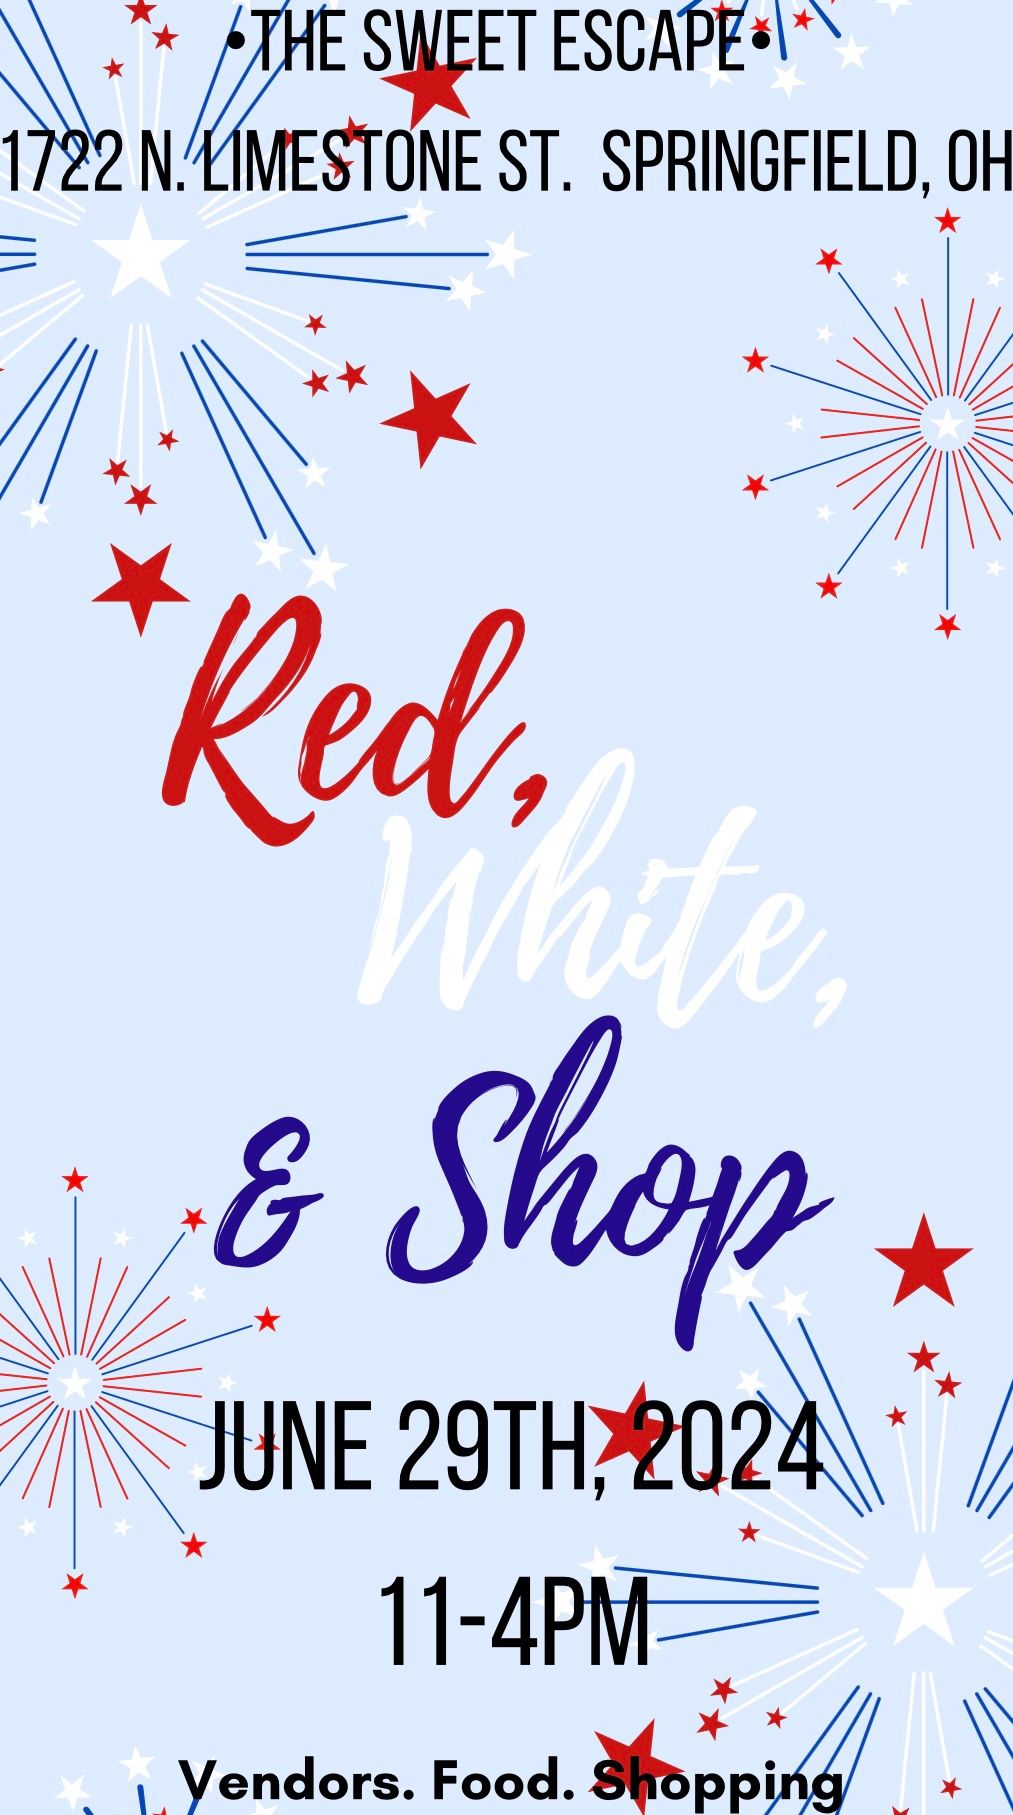 Red, white, & Shop @ The Sweet Escape